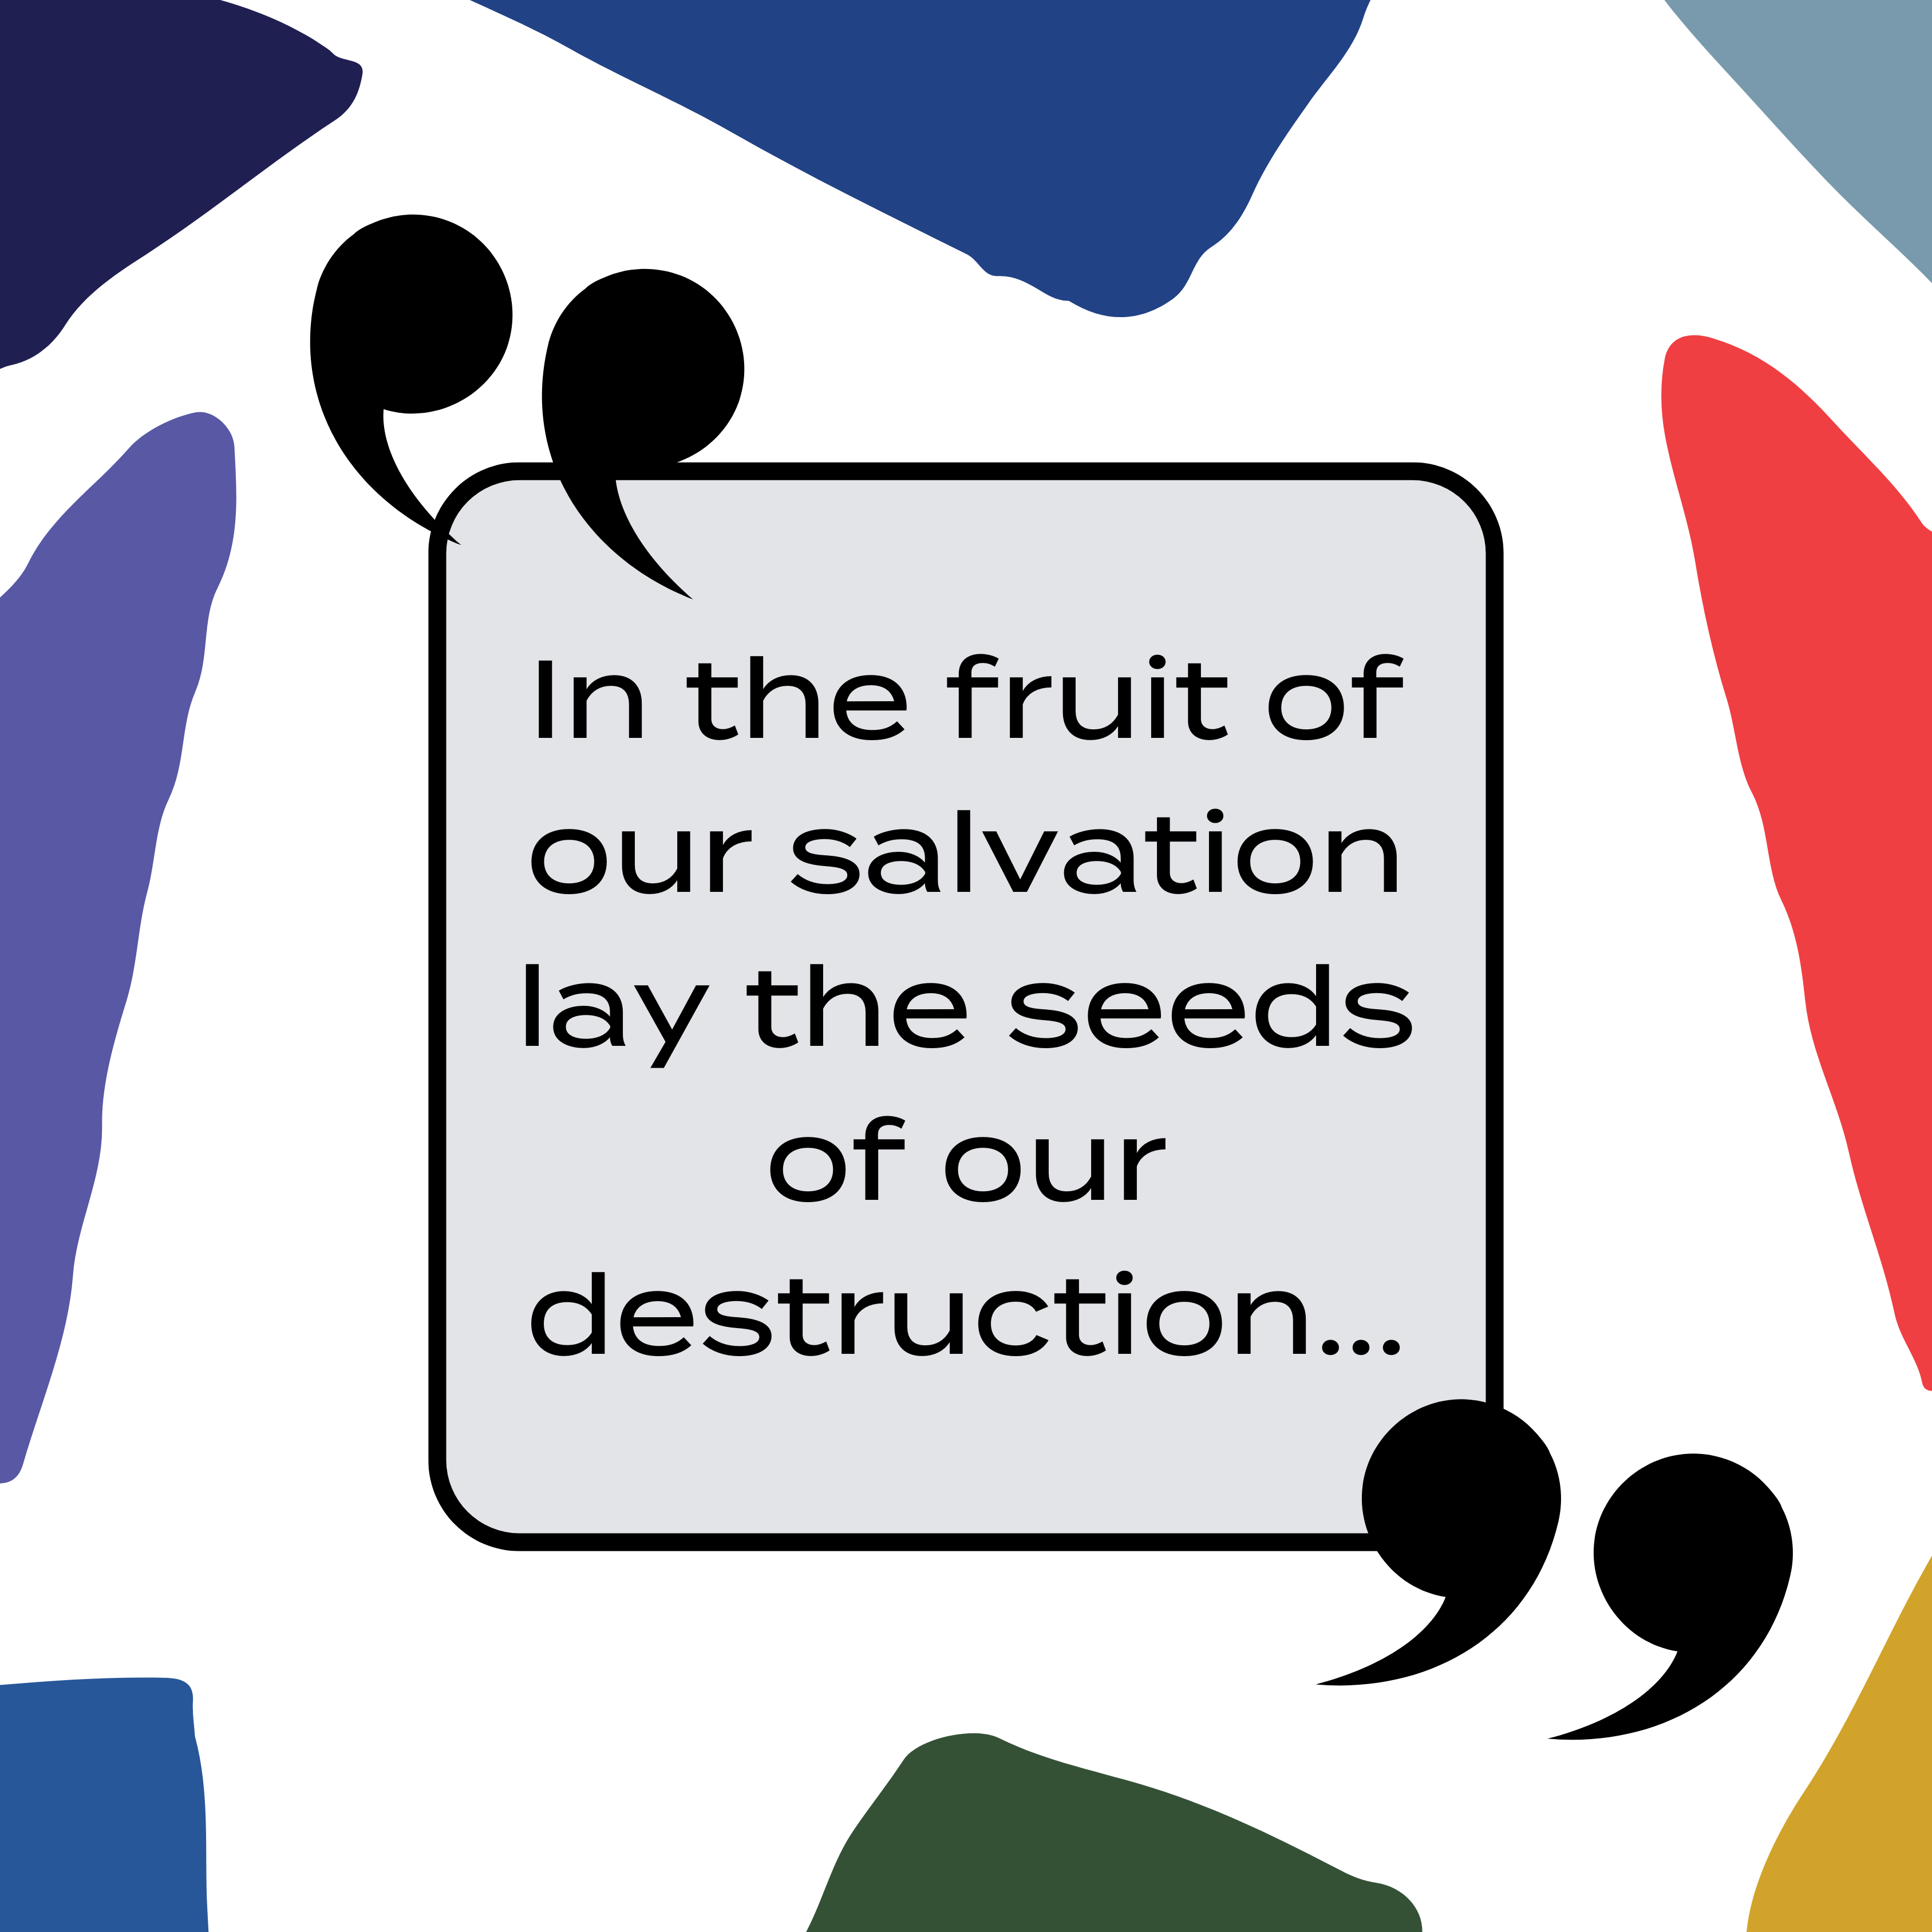 Text, "In the fruit of our salvation lay the seeds of our destruction."